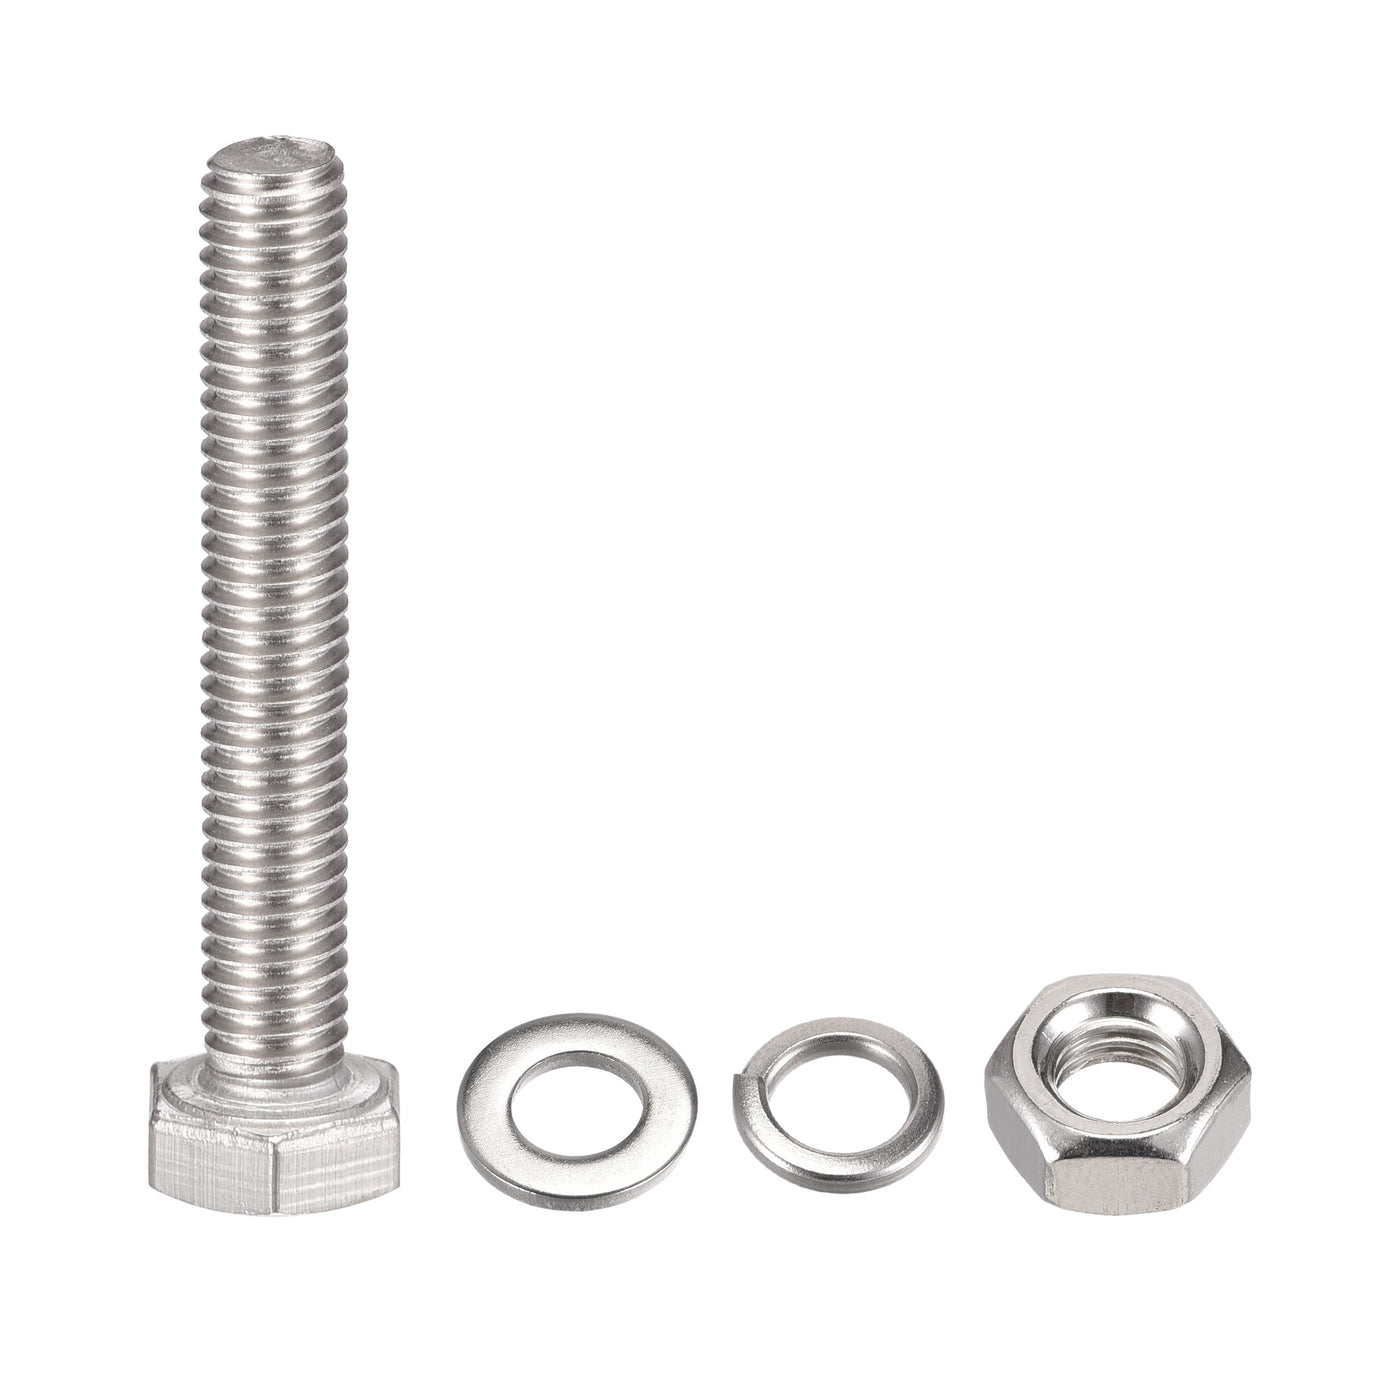 Uxcell Uxcell M6 x 20mm Hex Head Screws Bolts, Nuts, Flat & Lock Washers Kits, 304 Stainless Steel Fully Thread Hexagon Bolts 10 Sets